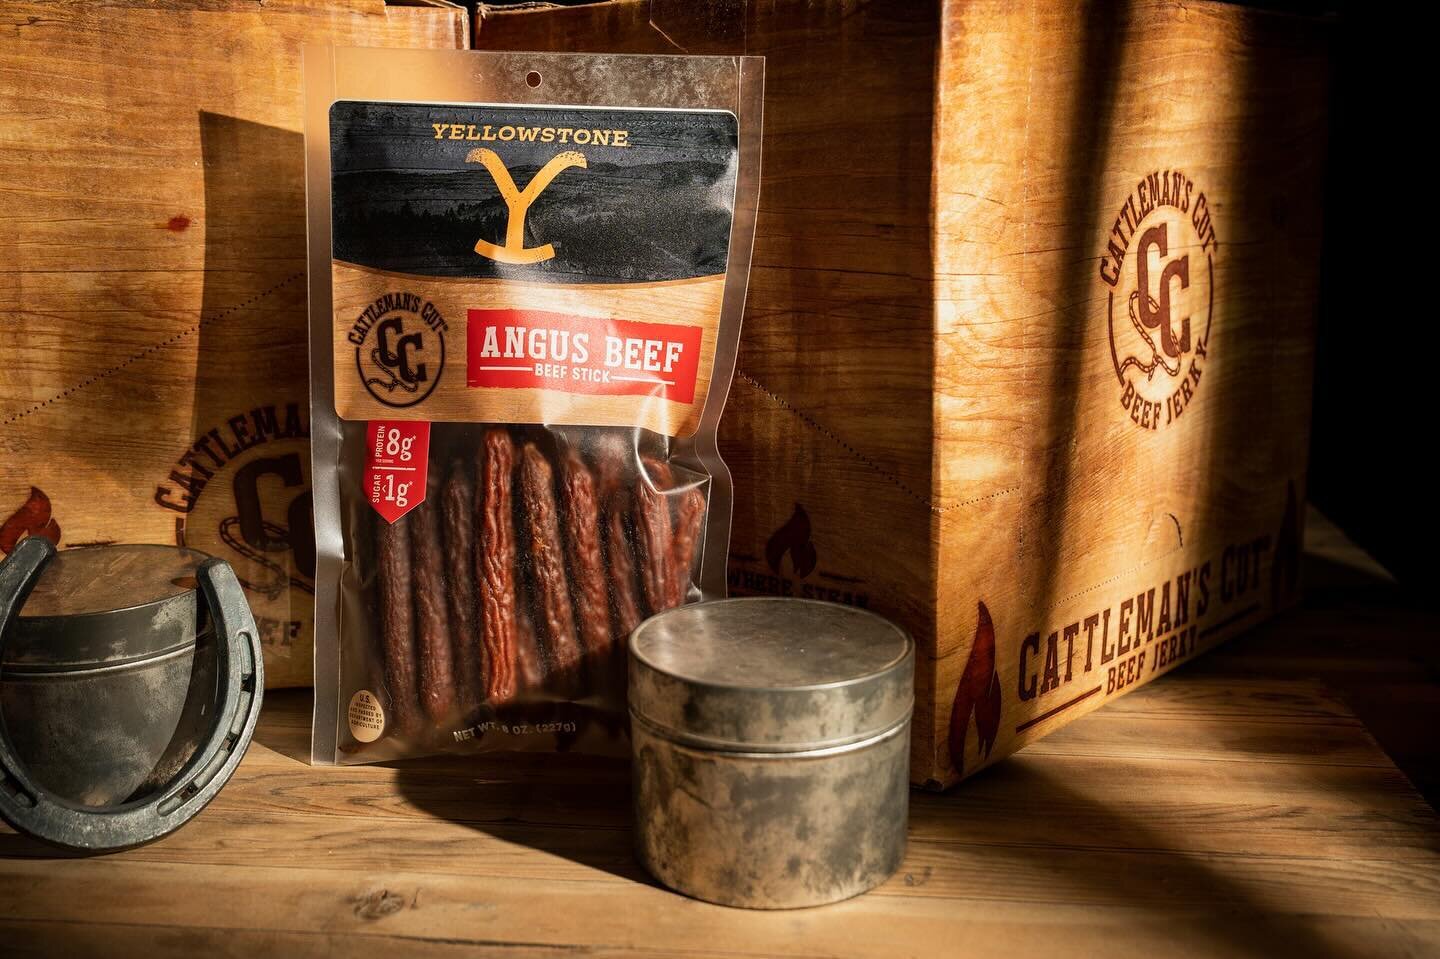 #CattlemanUp like a Dutton with our NEW Angus Beef Sticks!